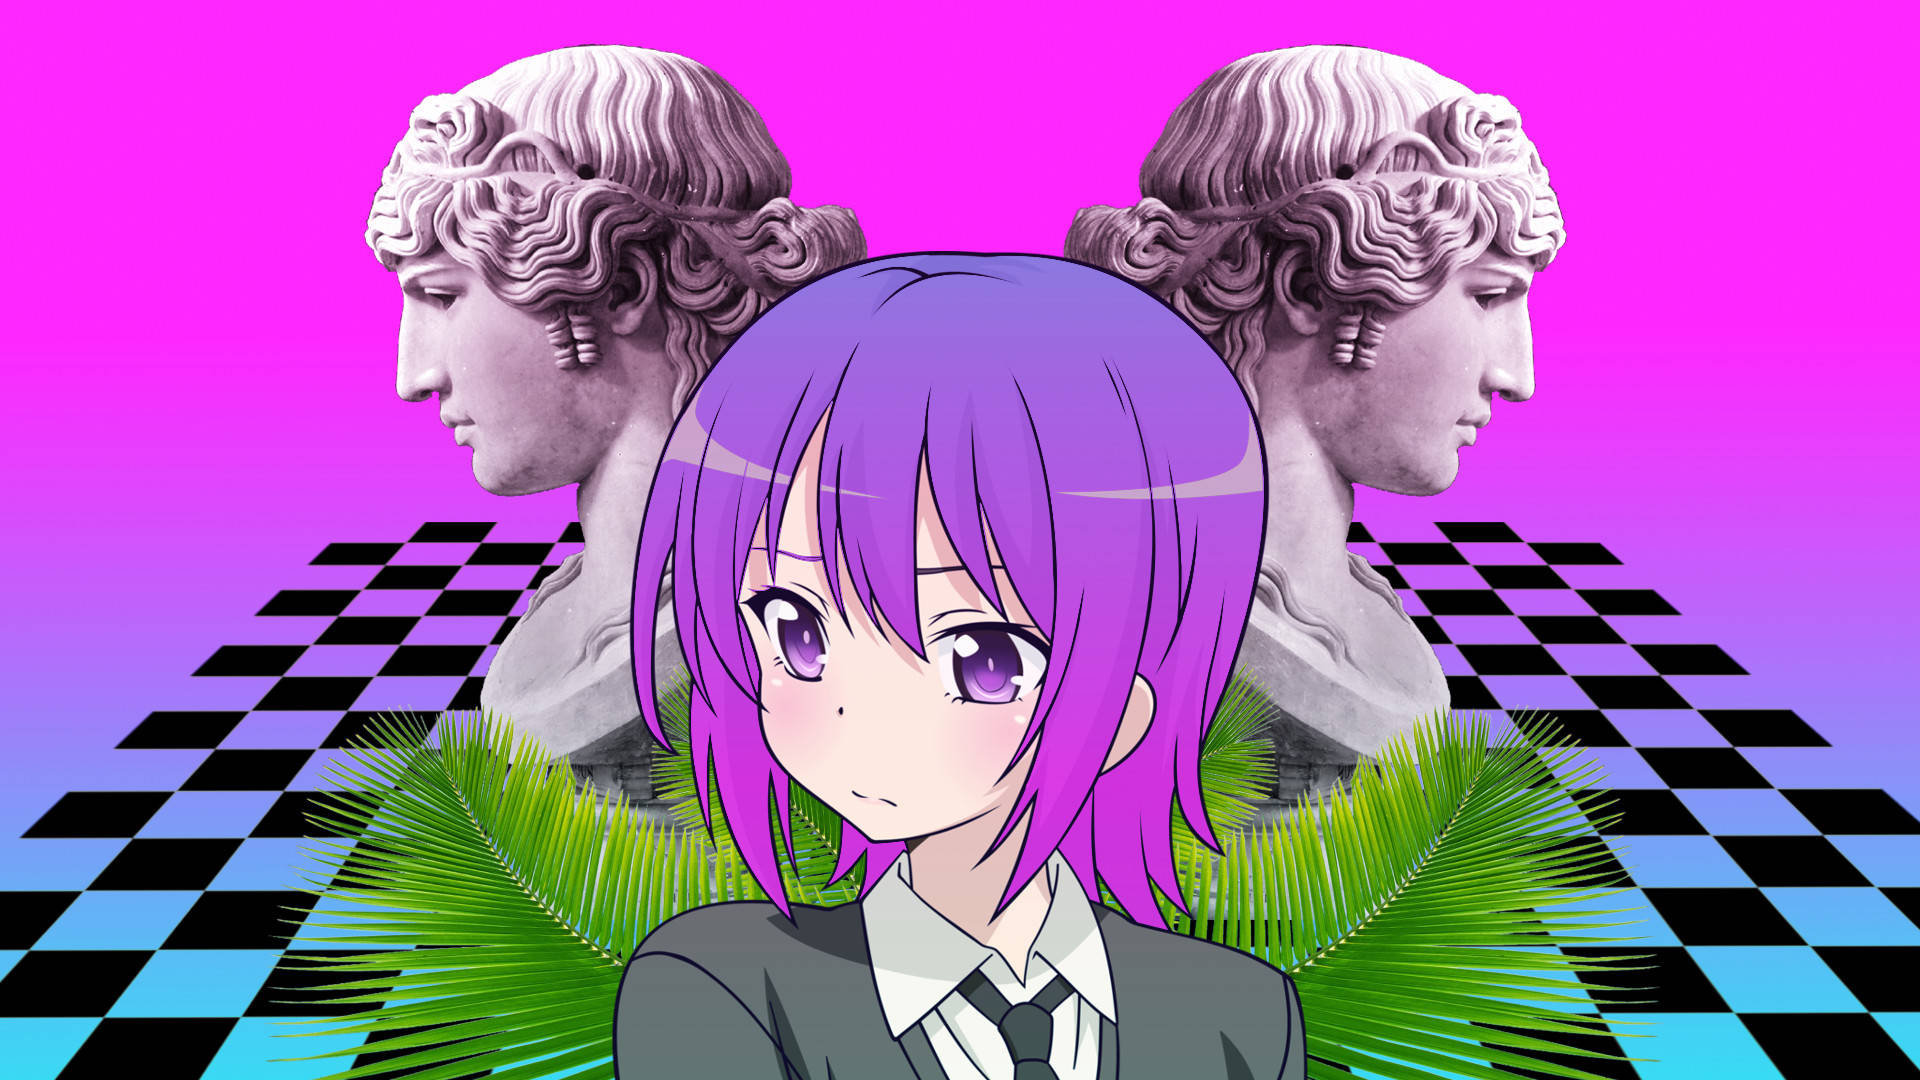 Aesthetic Pfp Anime Girl And Statues Background